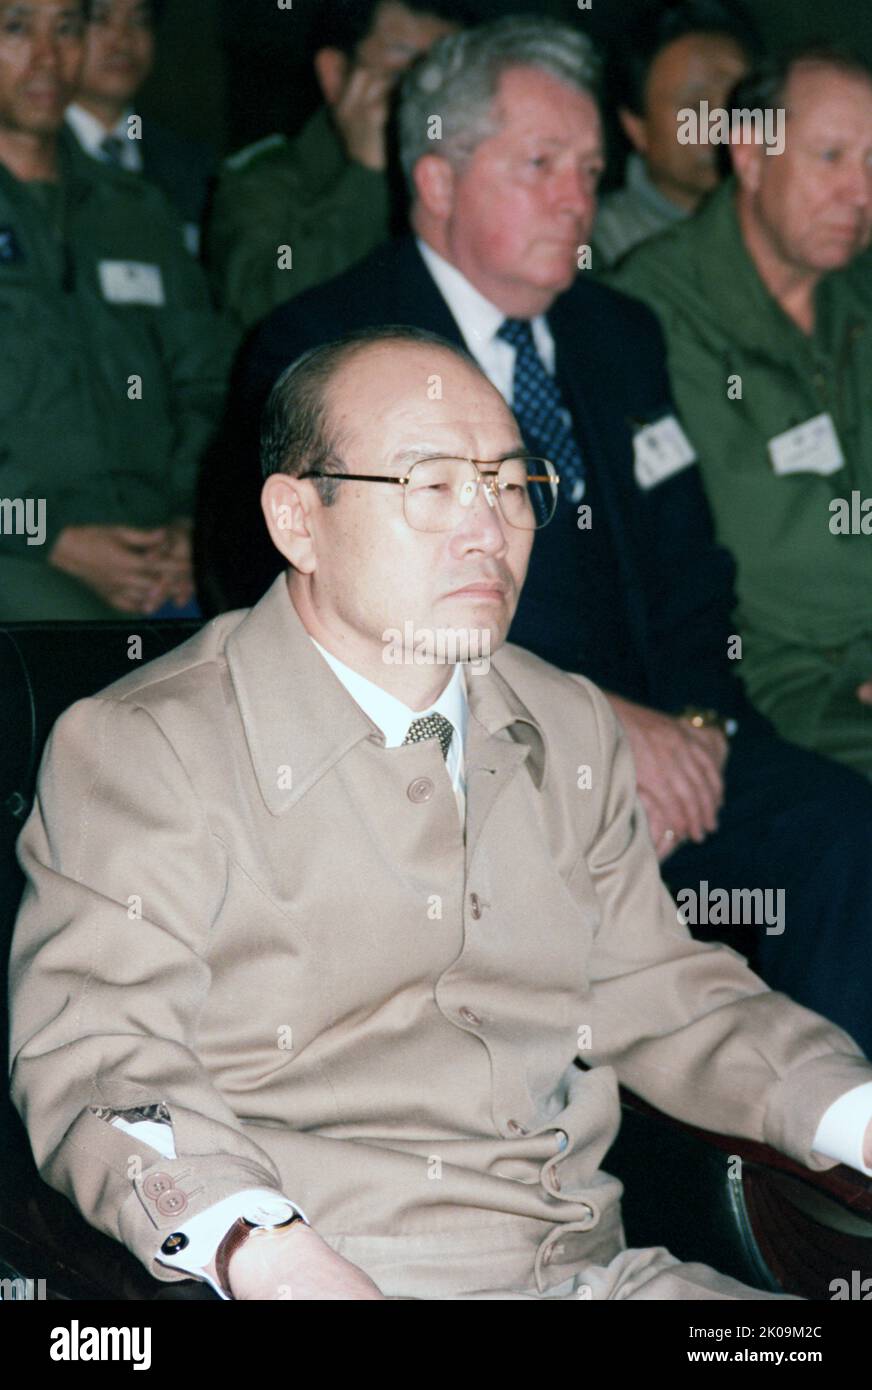 Korean President Chun Doo-hwan attends a briefing given be Major General (MGEN) Claude M. Kicklighter, Commander, 25th Infantry Division, during the joint U.S./South Korean Exercise TEAM SPIRIT '85. Stock Photo